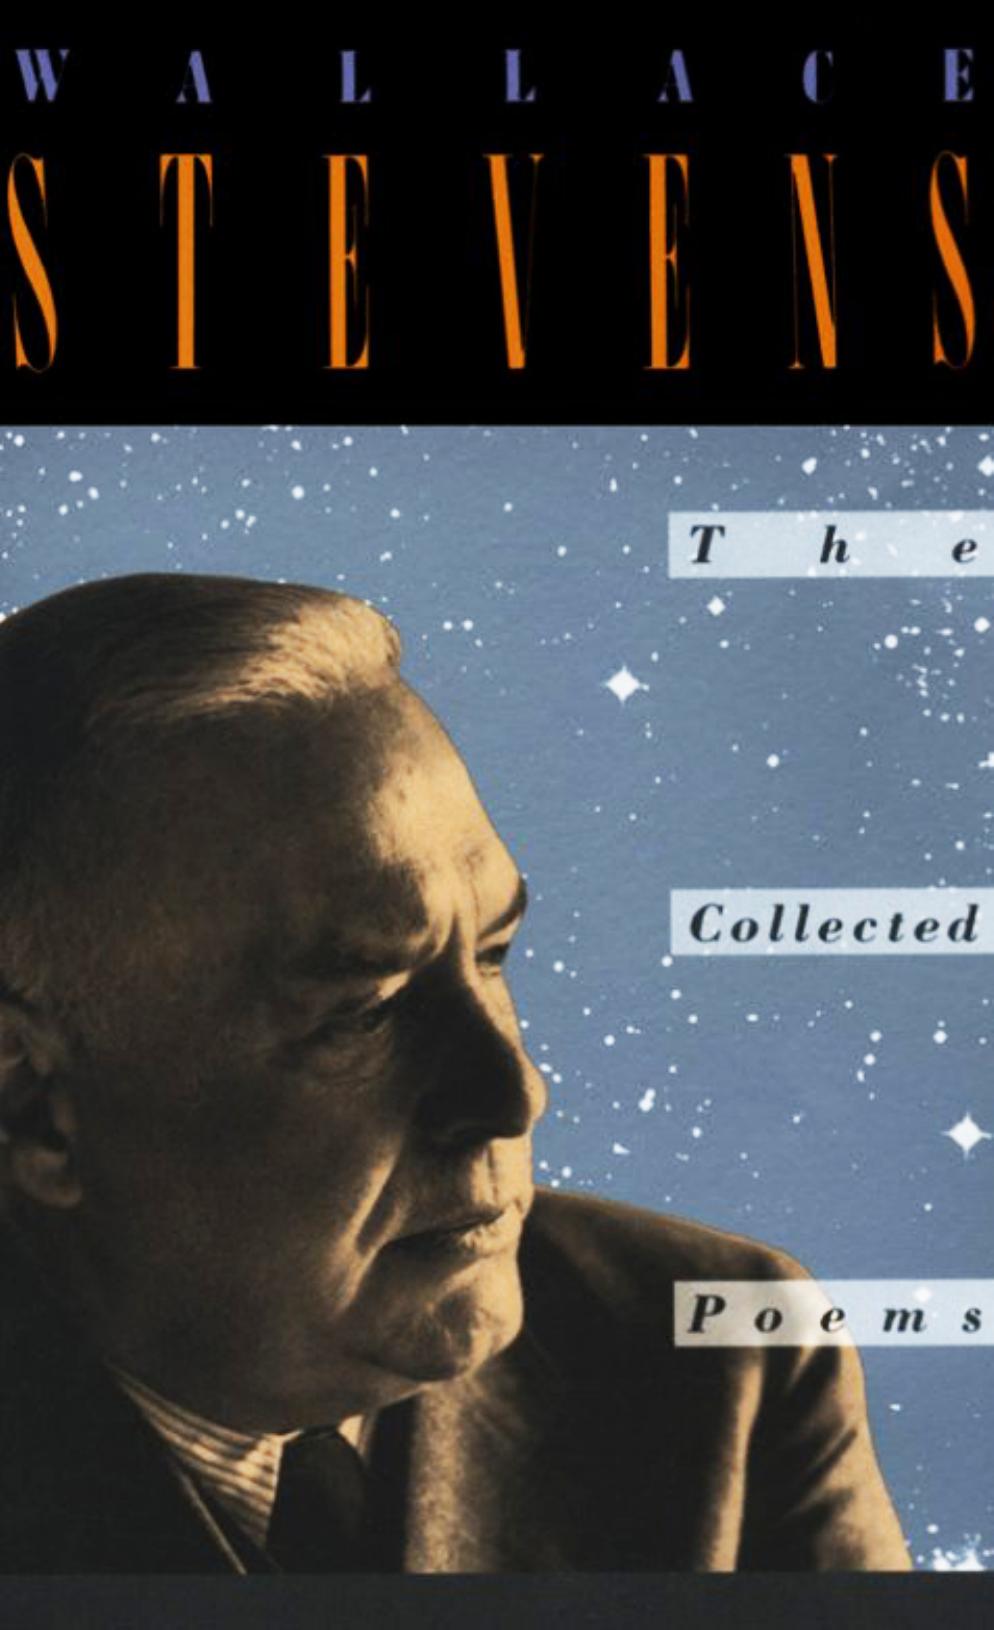 The Collected Poems by Wallace Stevens